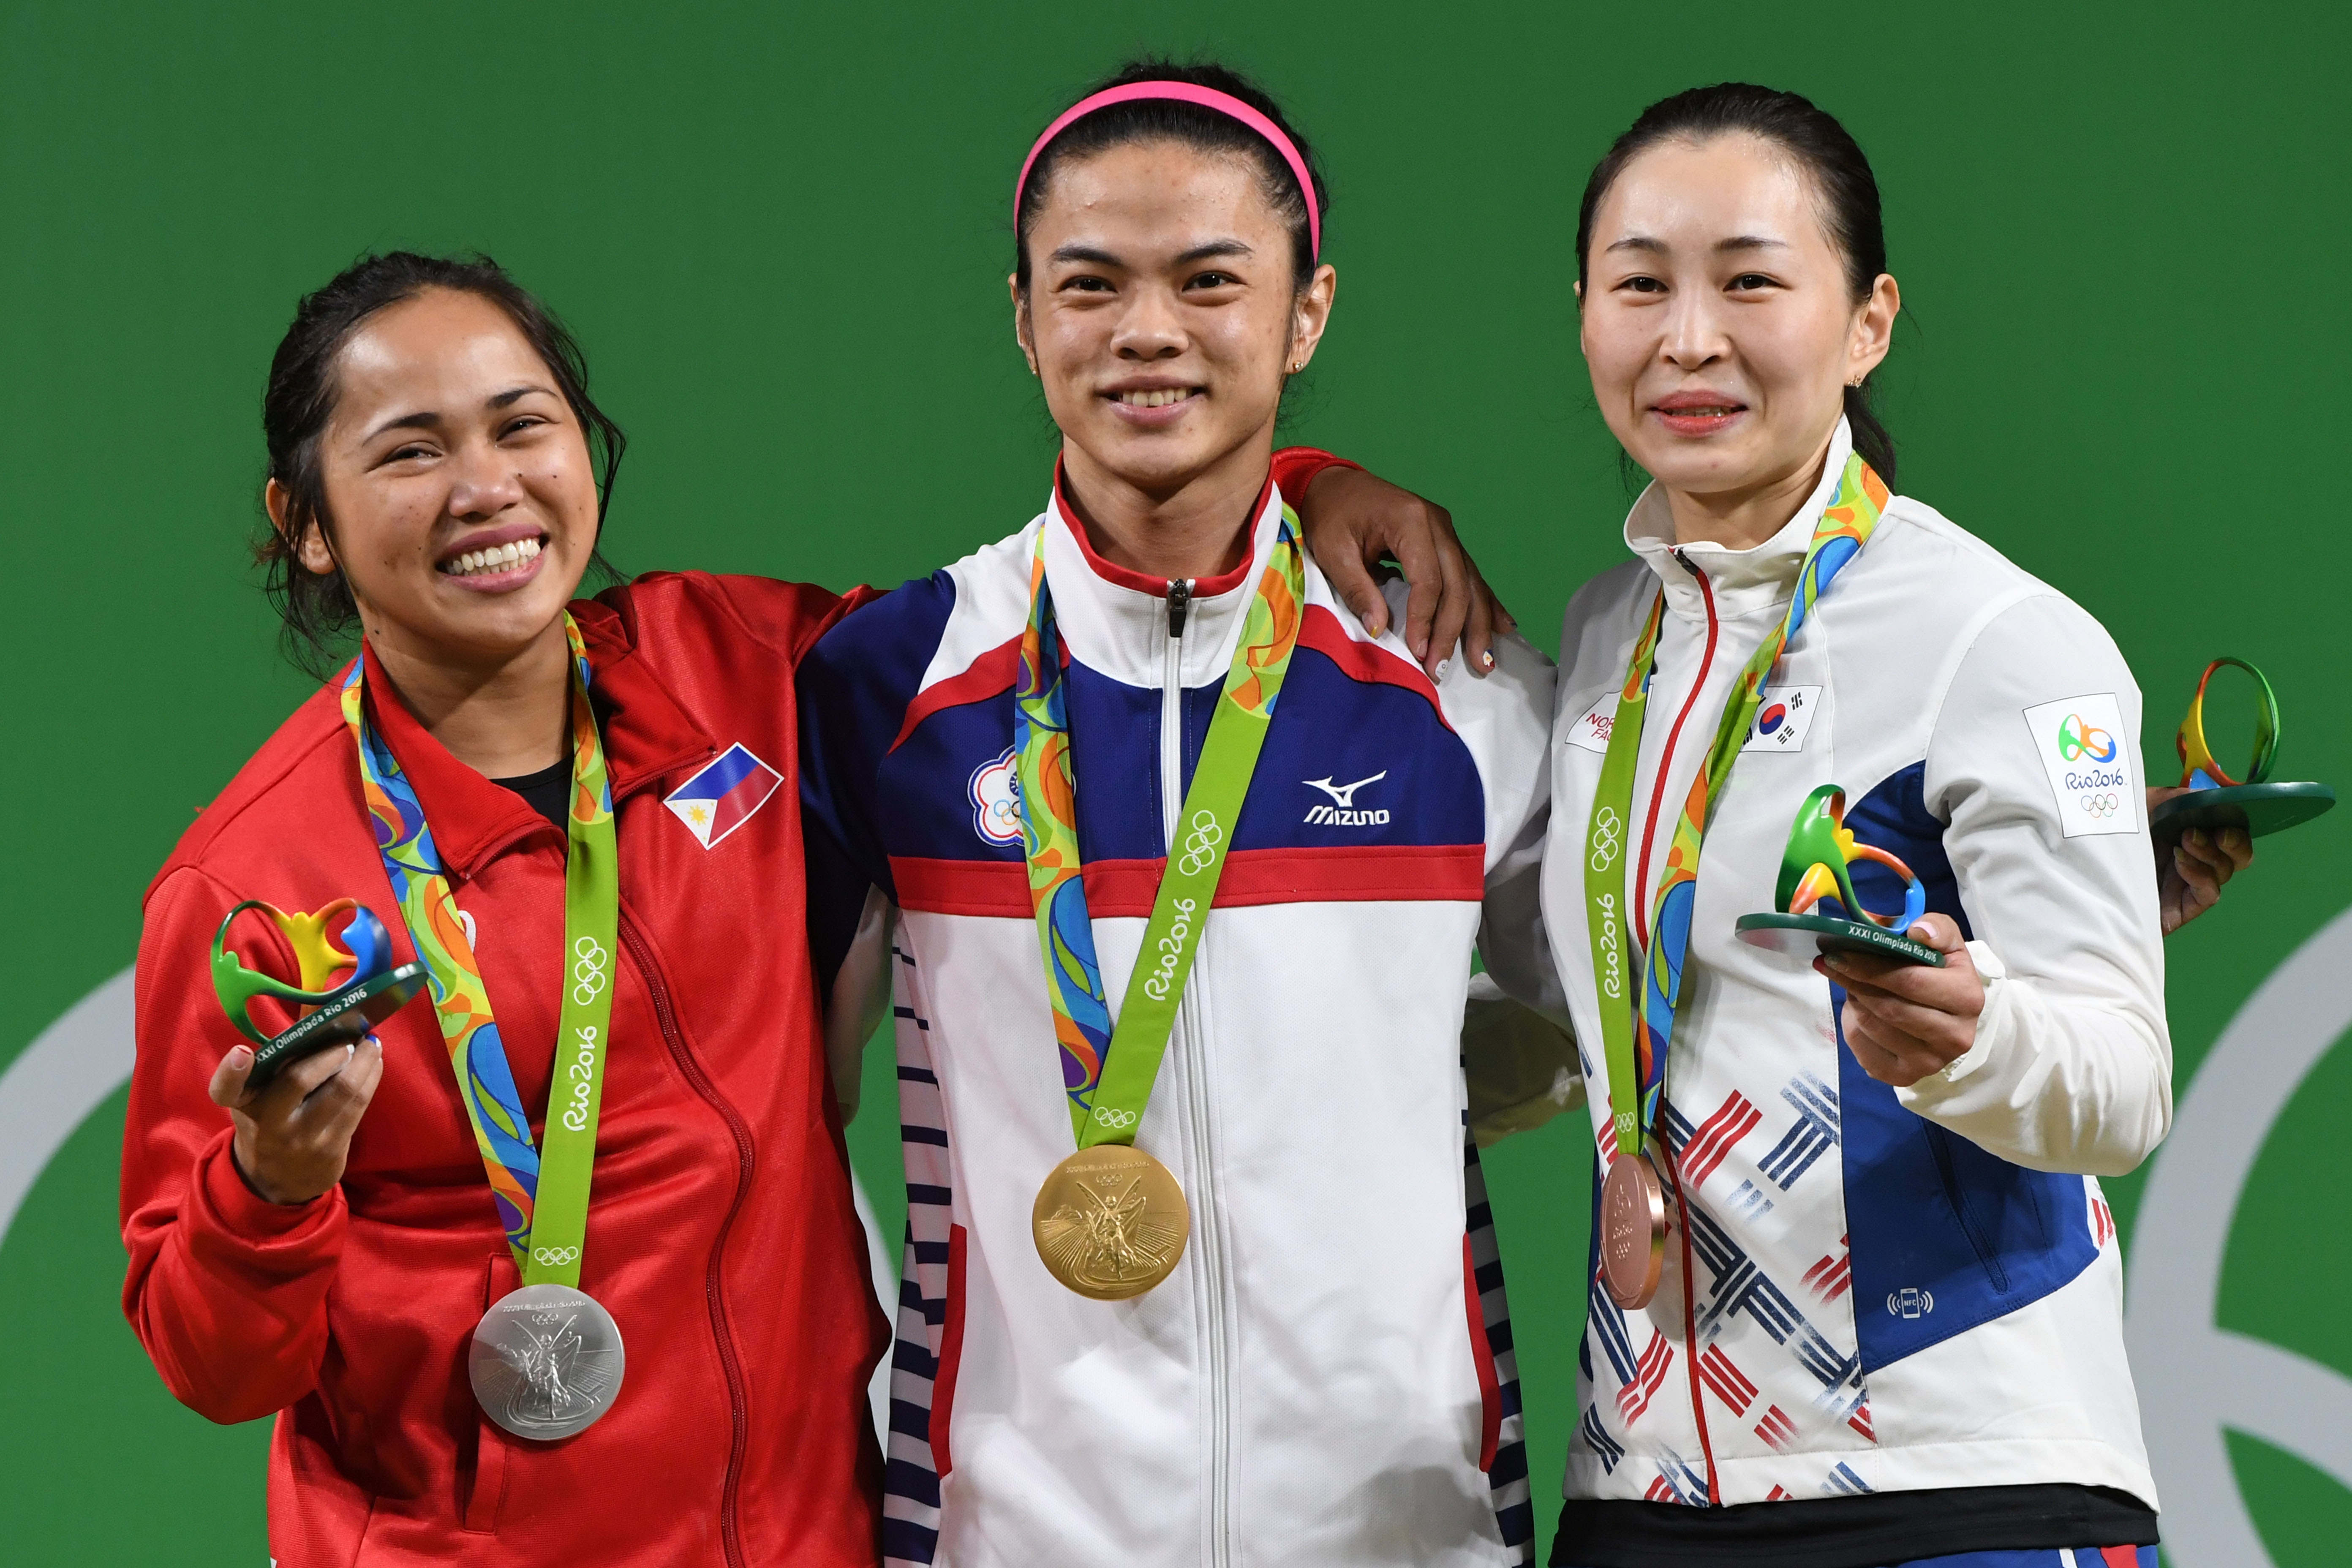 Tawain's gold medallist Hsu Shu-Ching (C), Philippines' silver medallist Hidilyn Diaz (L) and South Korea's bronze medallist Yoon Jin Hee (R) pose on the podium after the women's 53kg weightlifting event at the Rio 2016 Olympic games in Rio de Janeiro on August 7, 2016. / AFP PHOTO / GOH Chai Hin